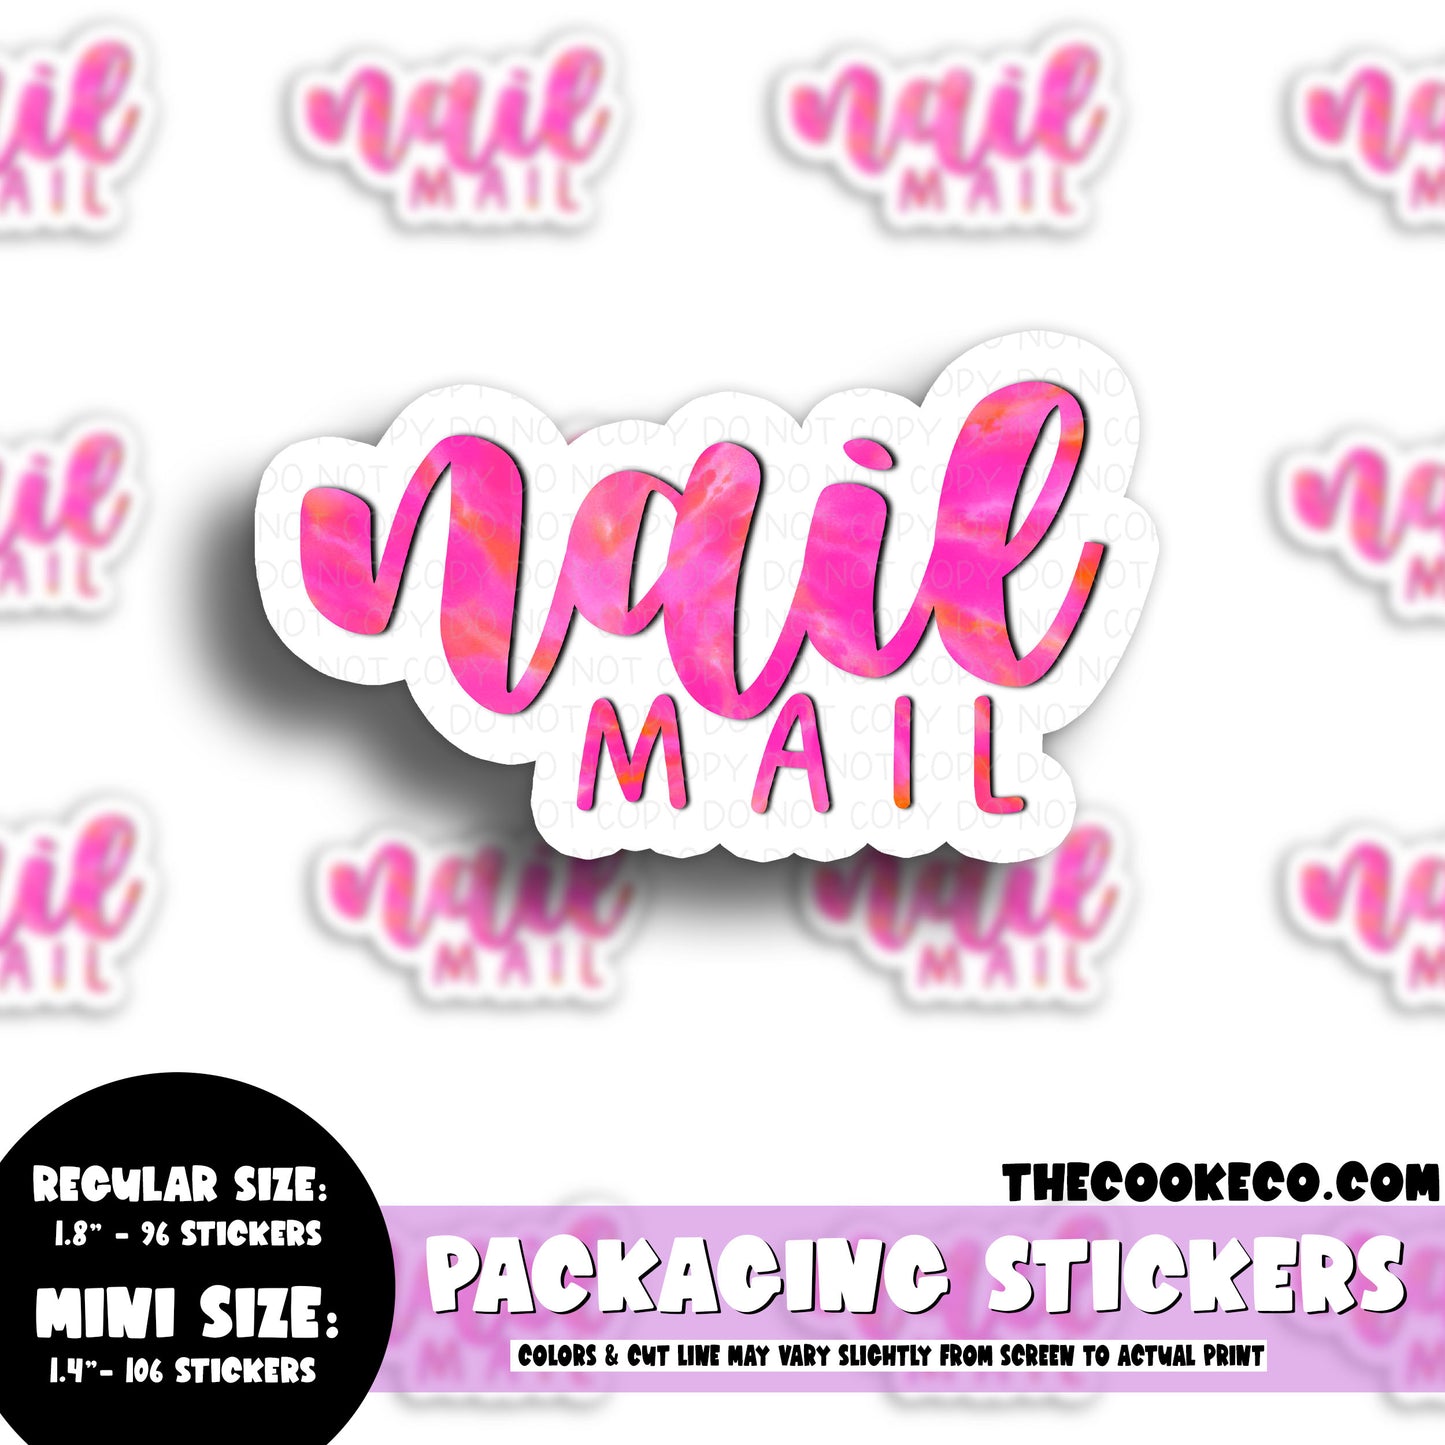 Packaging Stickers | #C0713 - NAIL MAIL